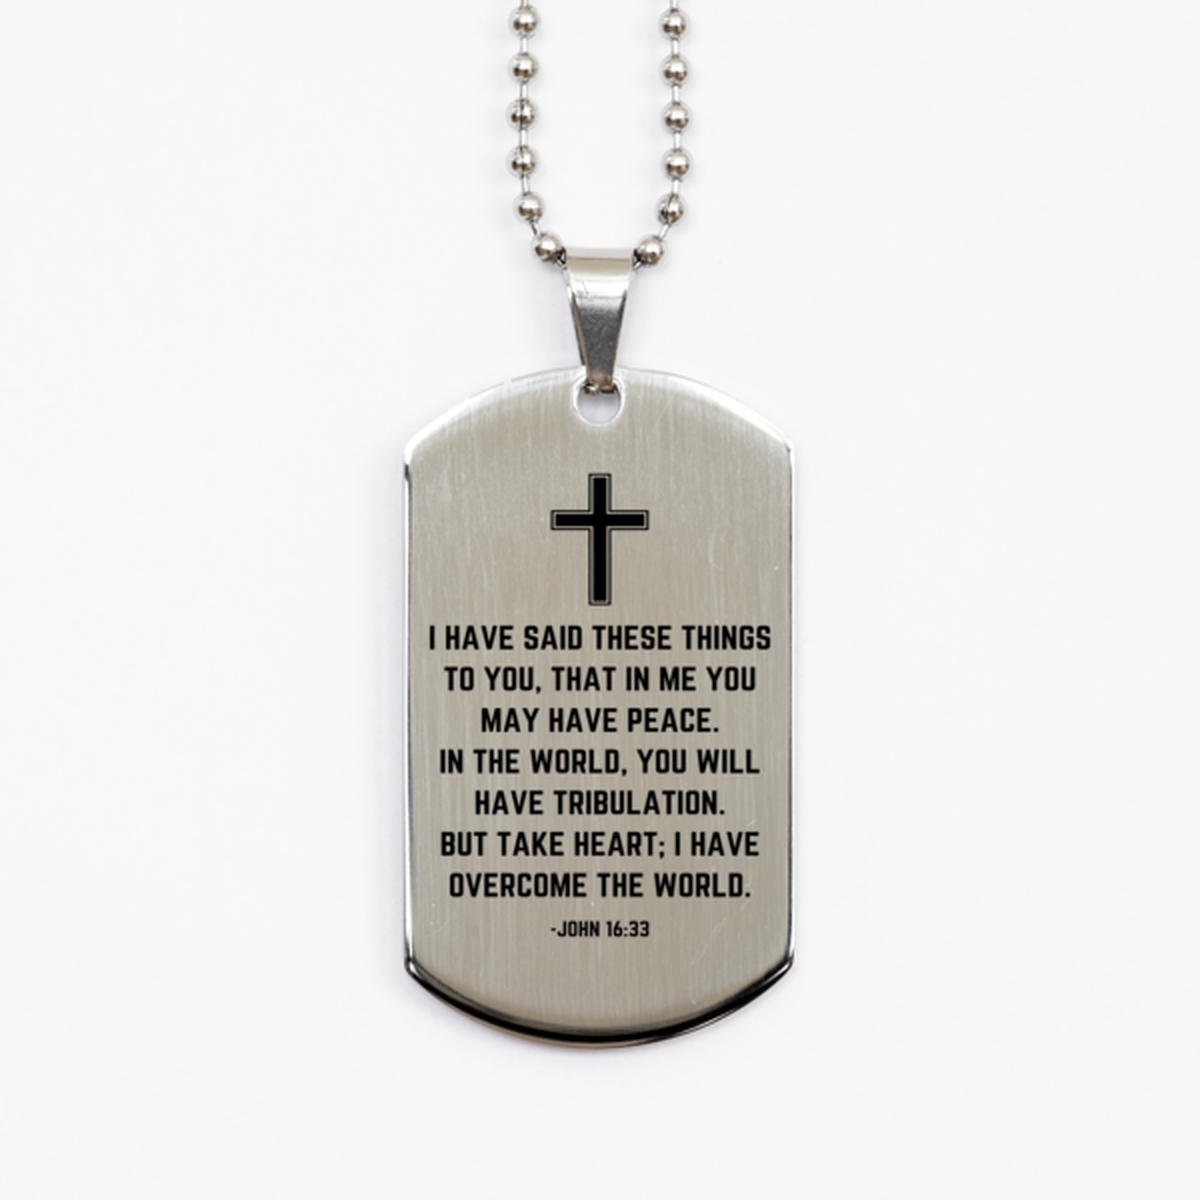 Baptism Gifts For Teenage Boys Girls, Christian Bible Verse Silver Dog Tag, I have said these things, Confirmation Gifts, Bible Verse Necklace for Son, Godson, Grandson, Nephew